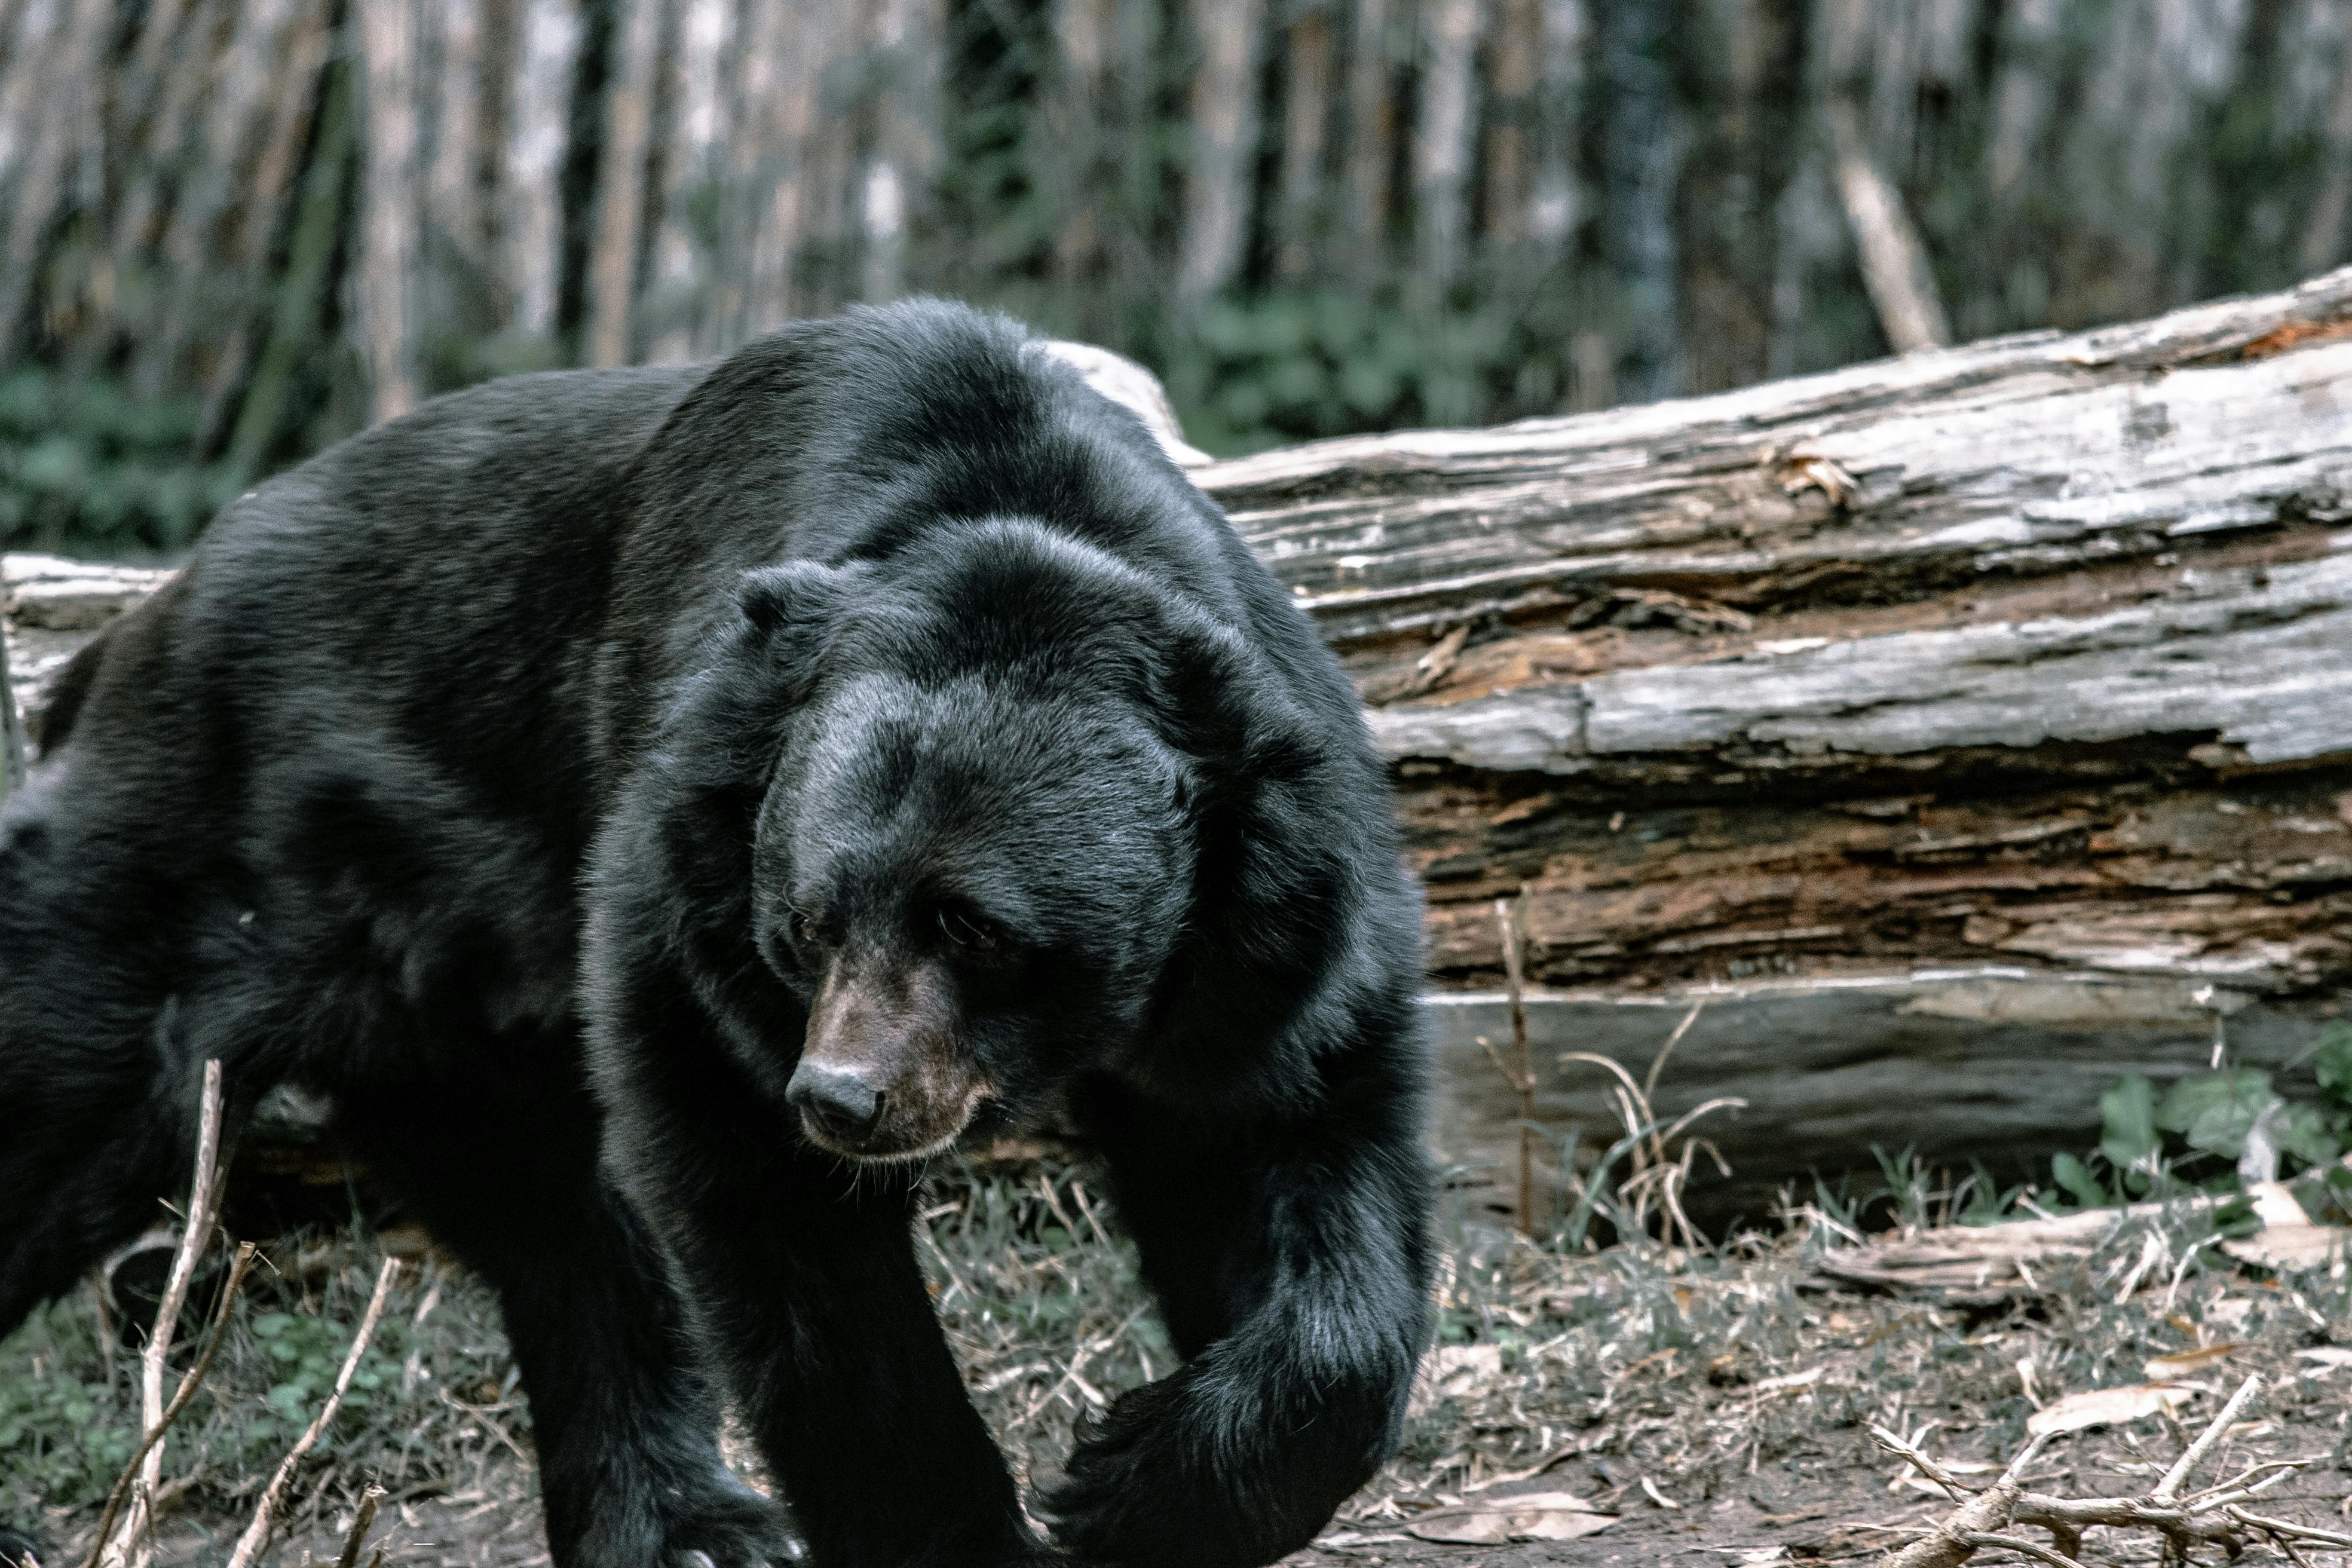 A black bear walking in the forest. | Photo: Pexels